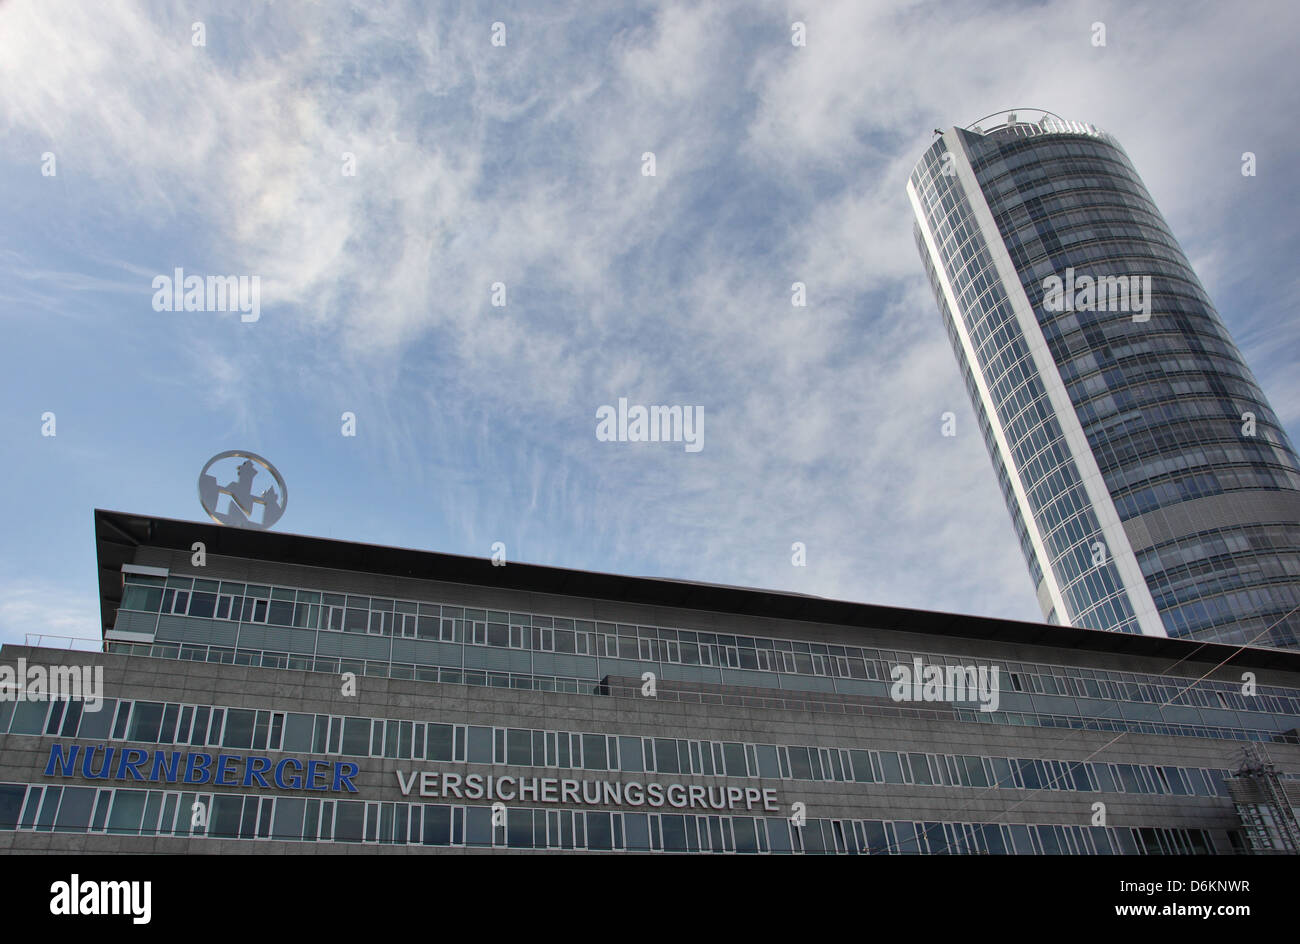 Nuernberg, Germany, the Nuremberg Administration Building Insurance Group Stock Photo